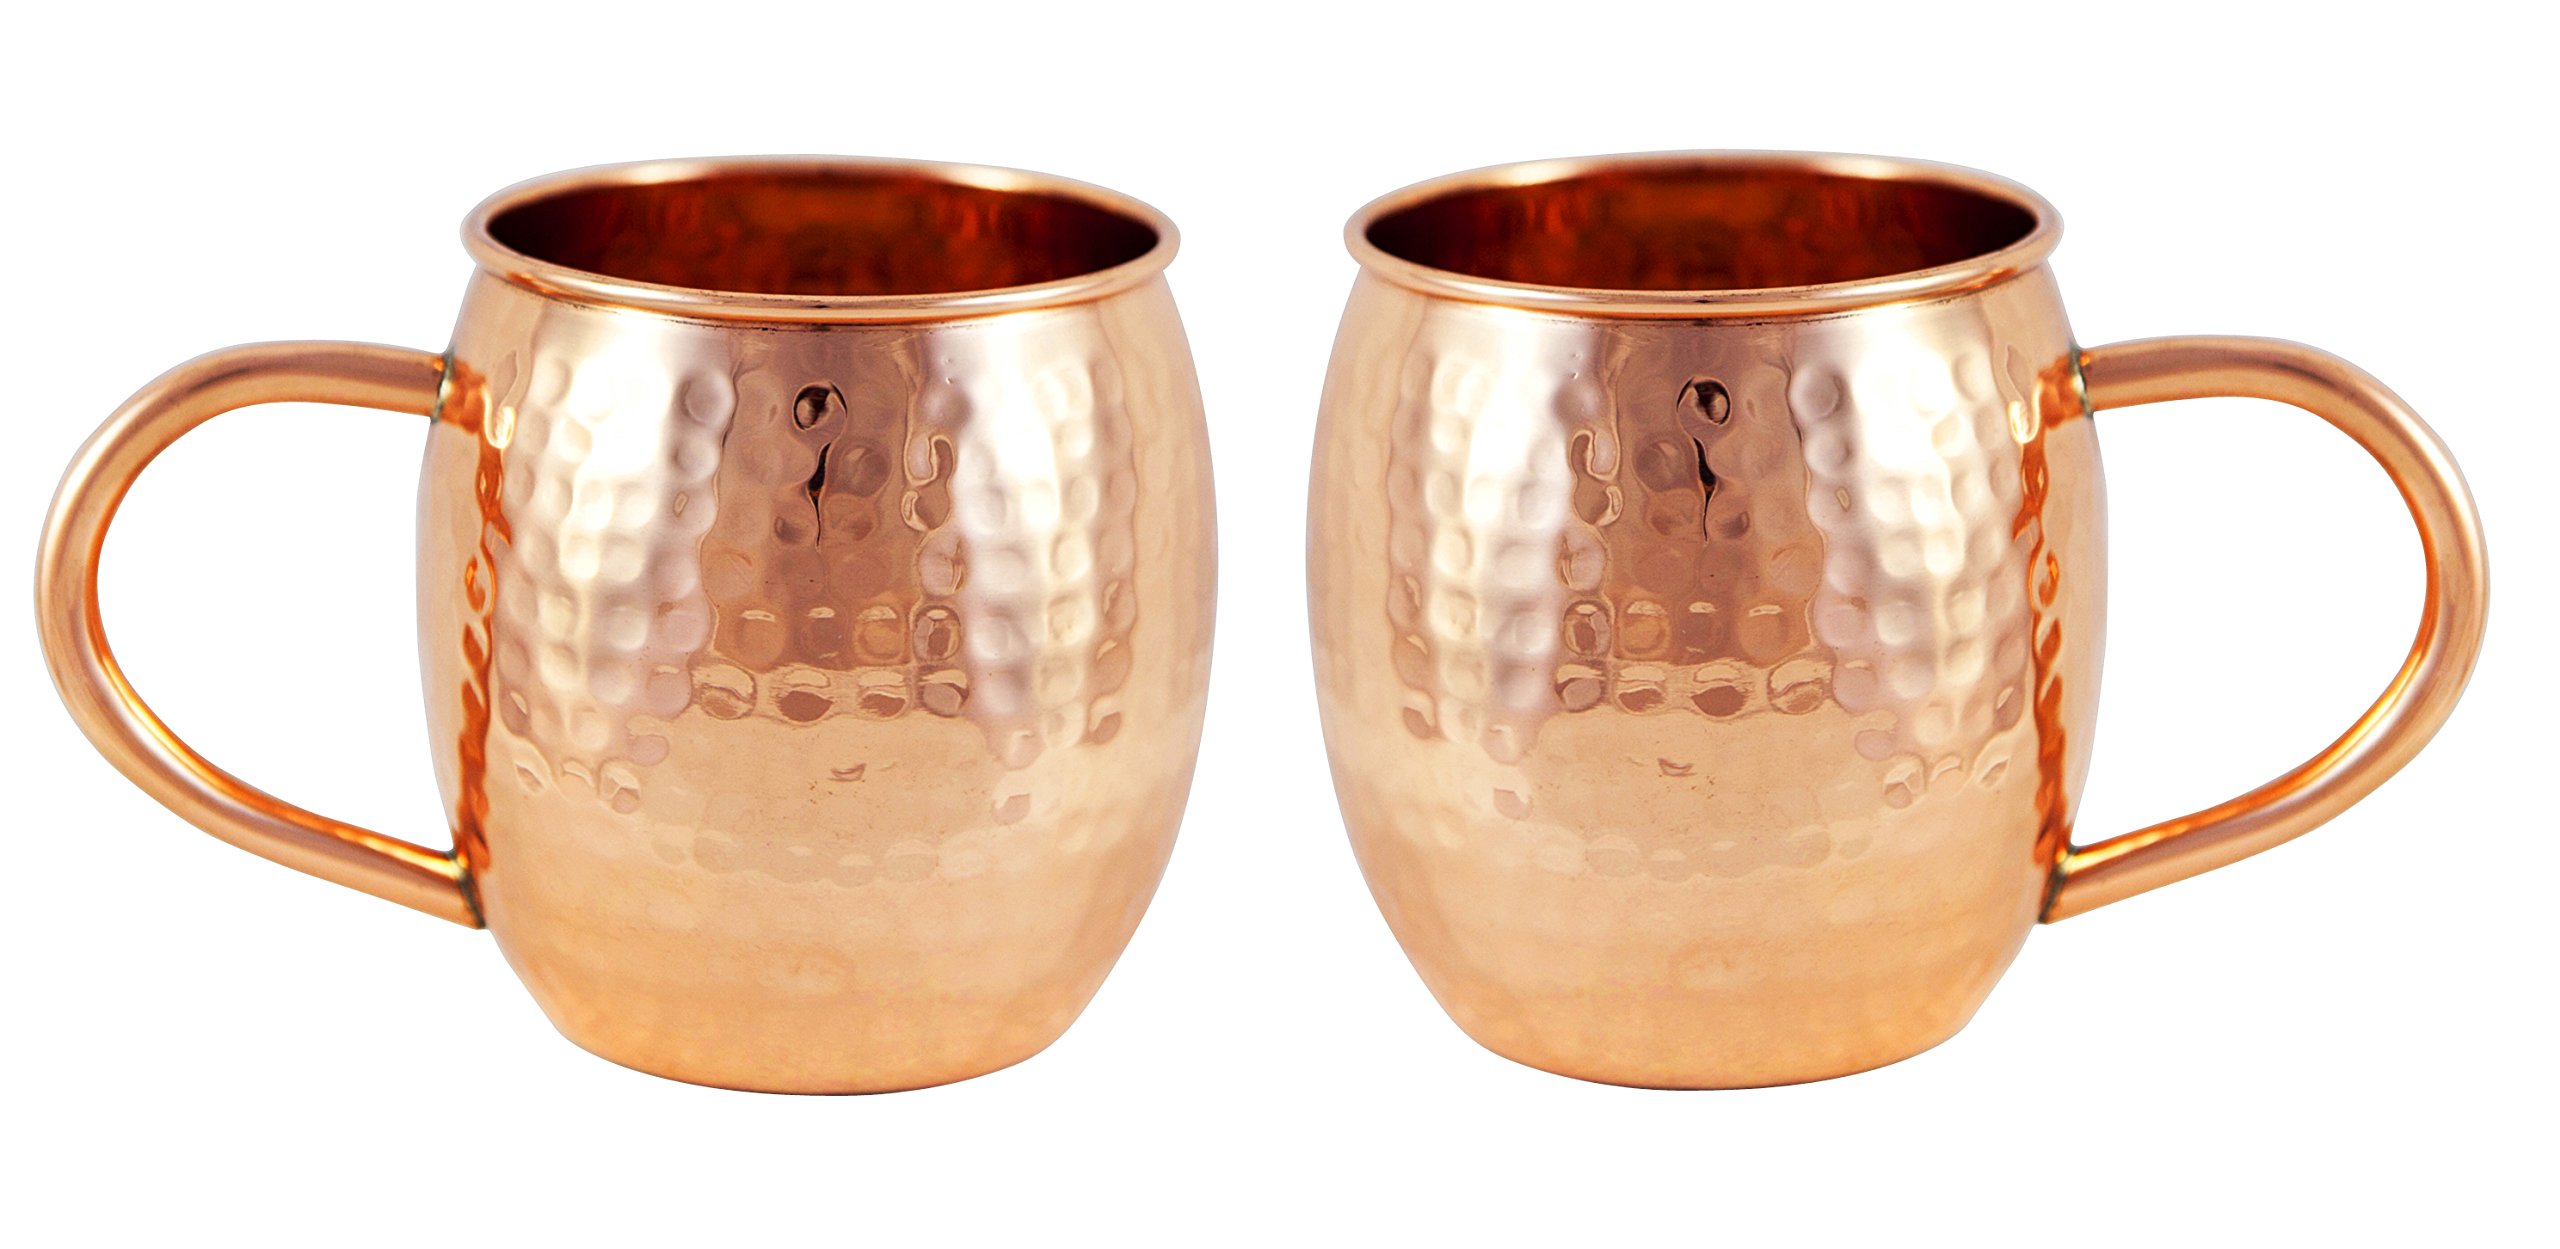 Alchemade Copper Barrel Mug for Moscow Mules - 16 oz - 100% Pure Hammered Copper - Heavy Gauge - No lining - includes FREE E-Recipe book